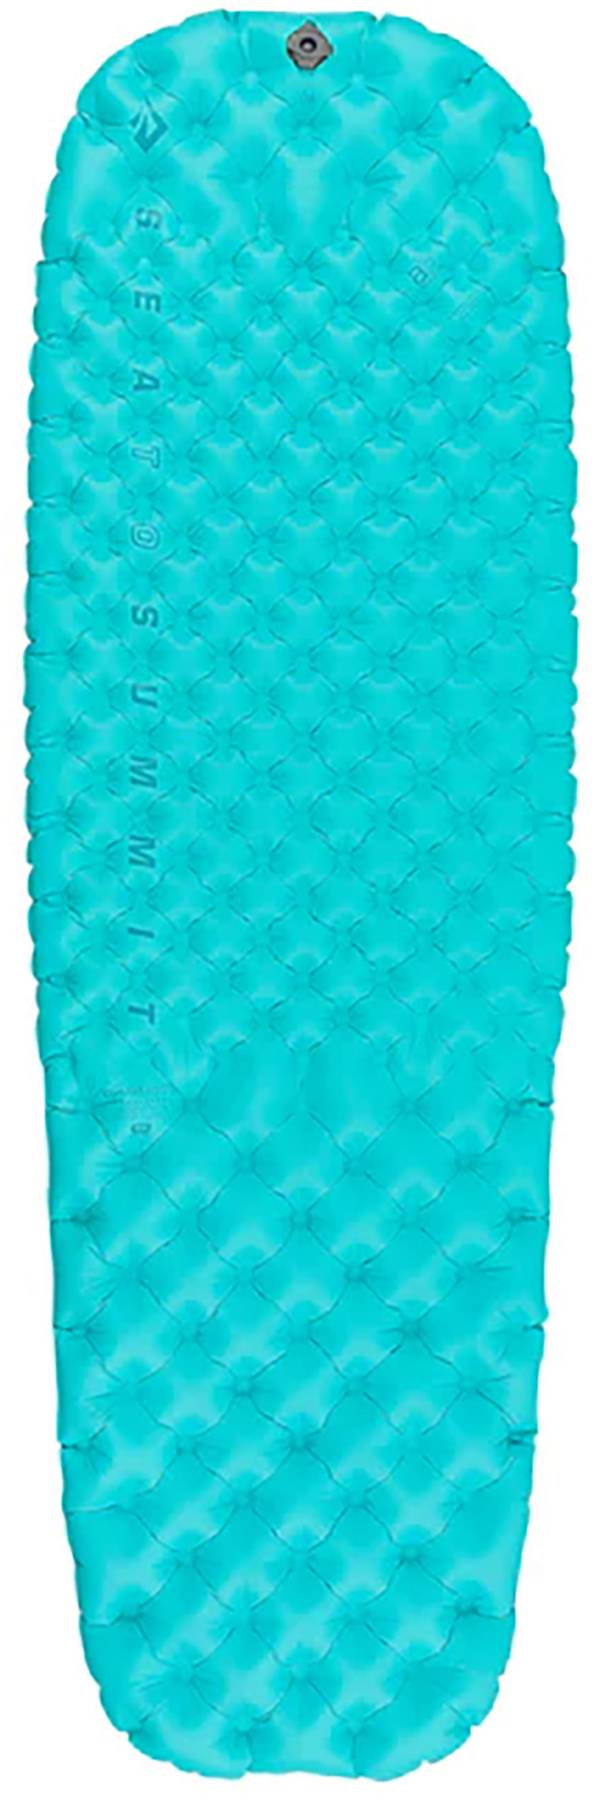 Sea to Summit Women's Comfort Light Insulated Mat product image